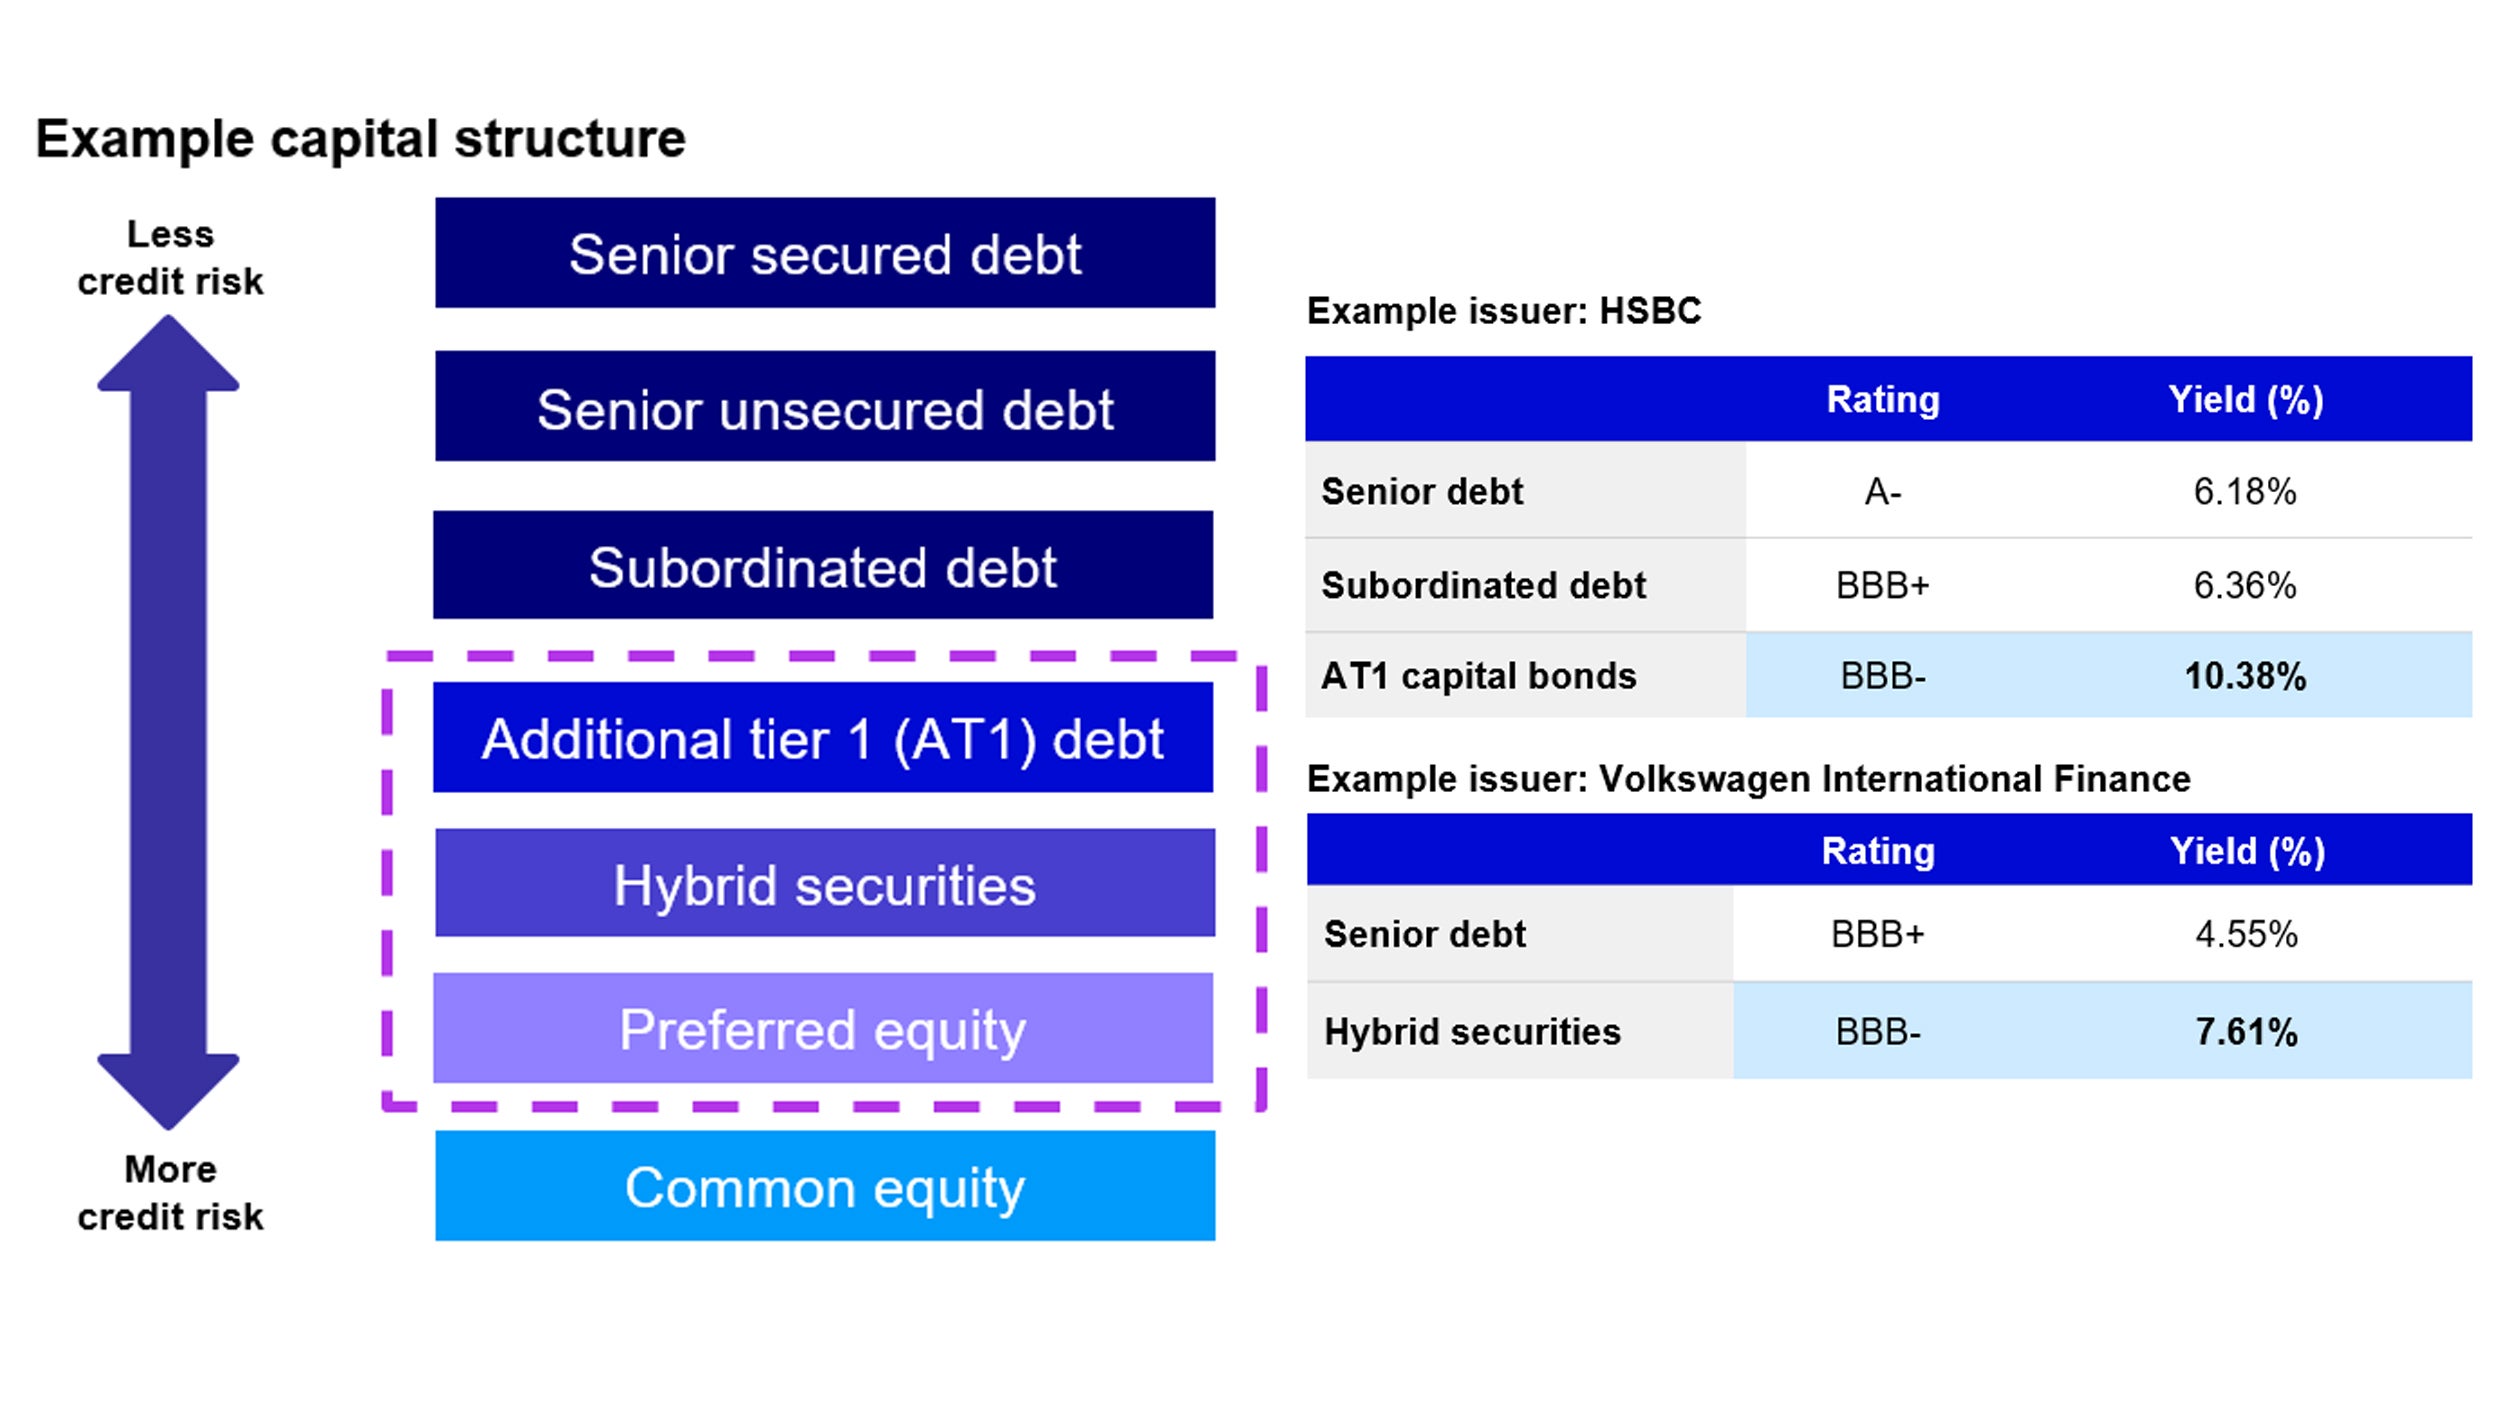 How seniority in the capital structure drives yields and credit ratings